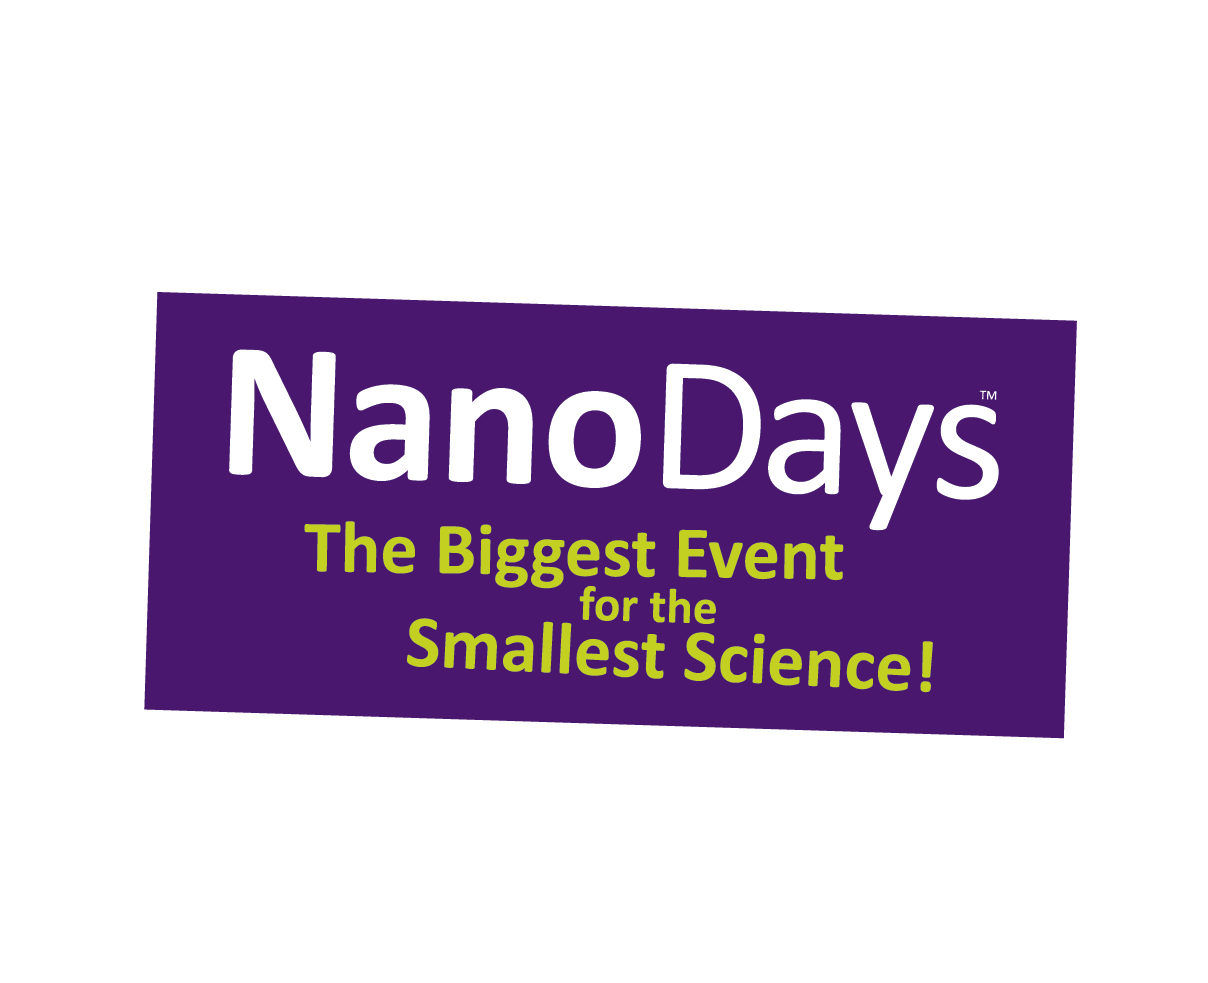 NanoDays logo - the Biggest Event for the Smallest Science